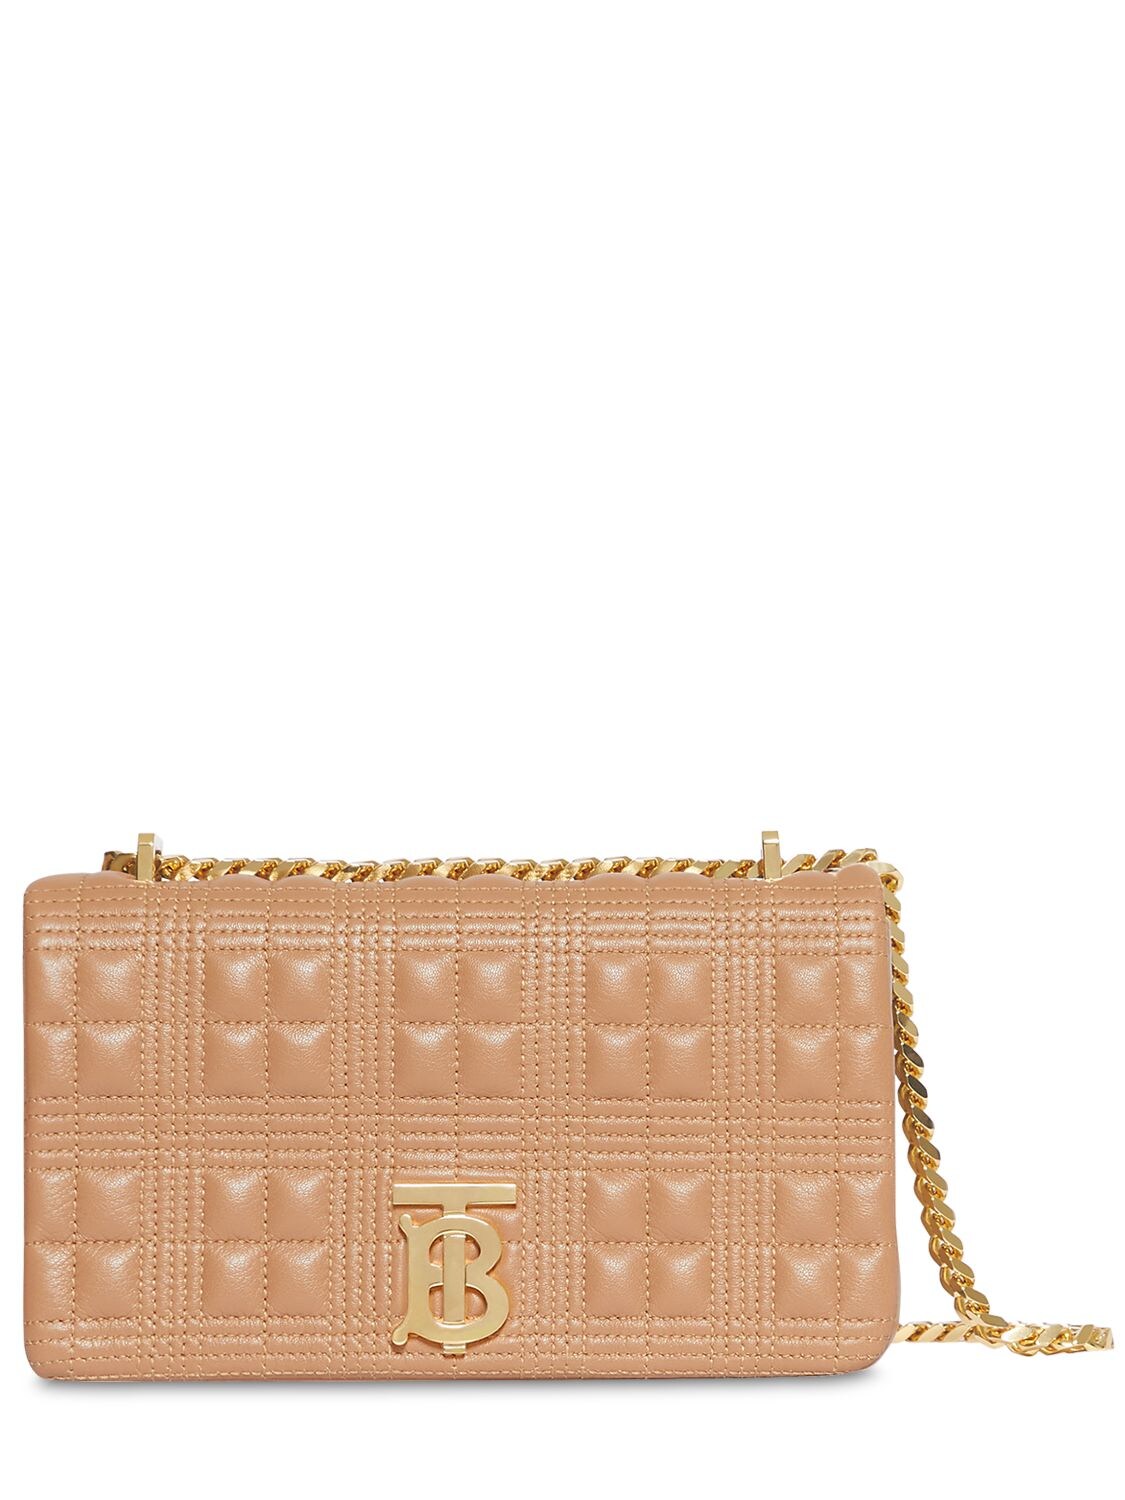 BURBERRY Sm Lola Quilted Leather Bag